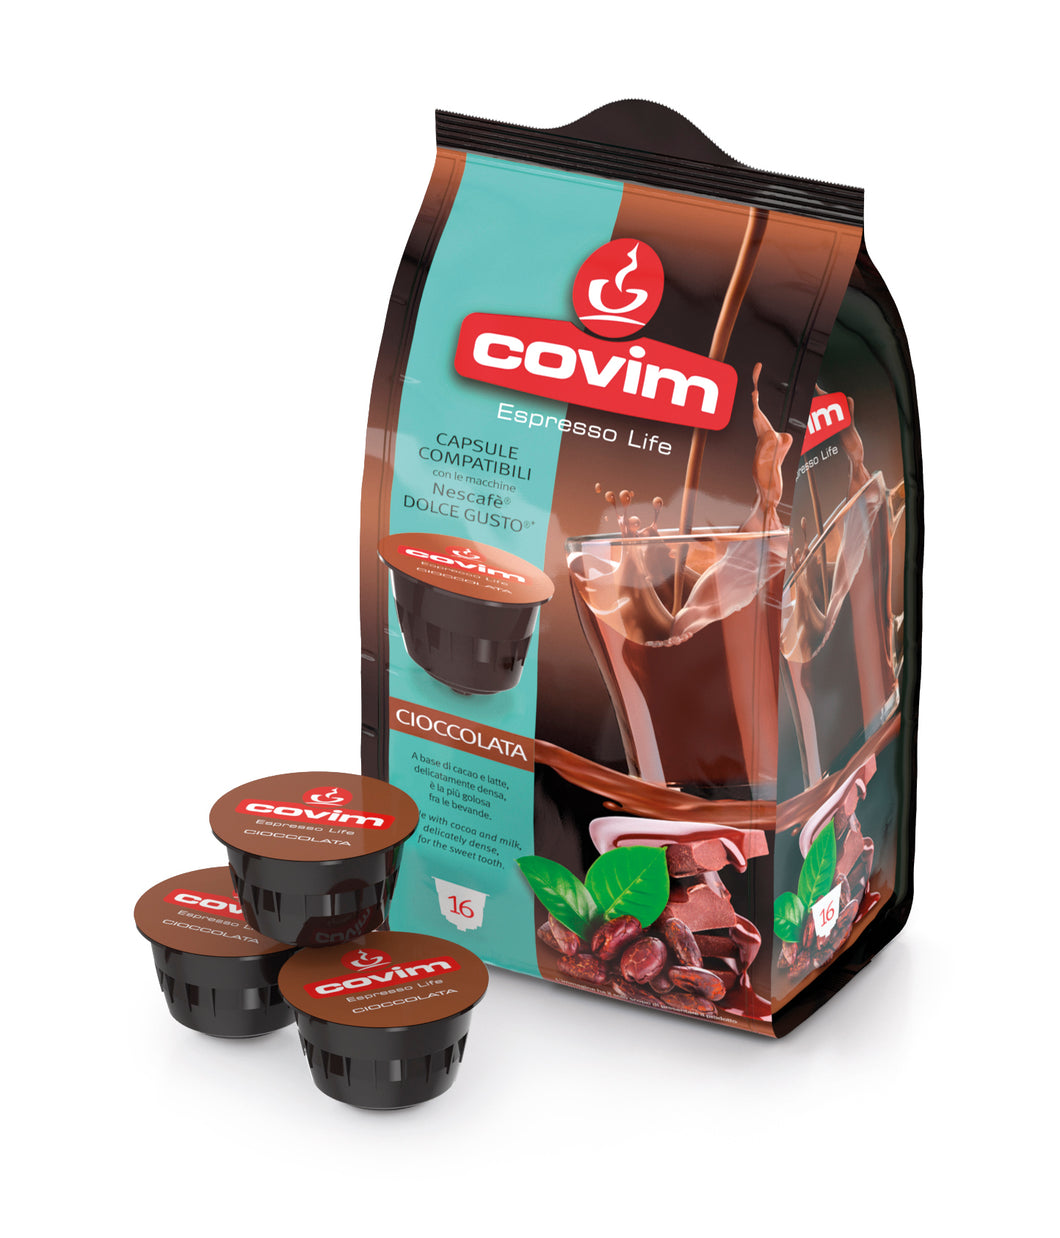 Covim 48 Pcs. GustoPiù - CHOCOLATE - 48 capsules (3 x 16) - Dolce Gust –  FoodEver - COVIM - Official Reseller